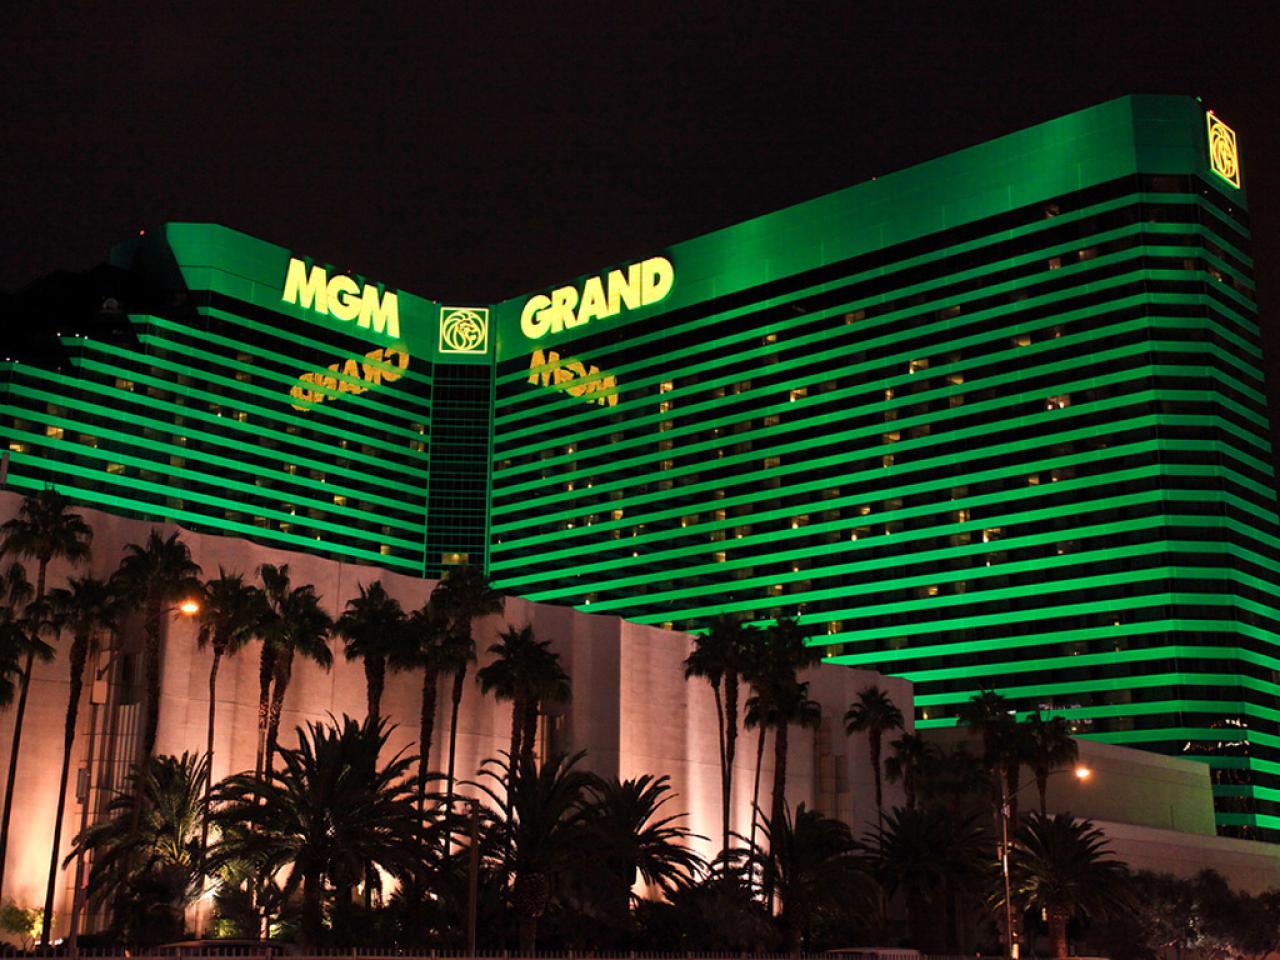 MGM Grand | Las Vegas Vacation Ideas and Guides : Travelchannel.com